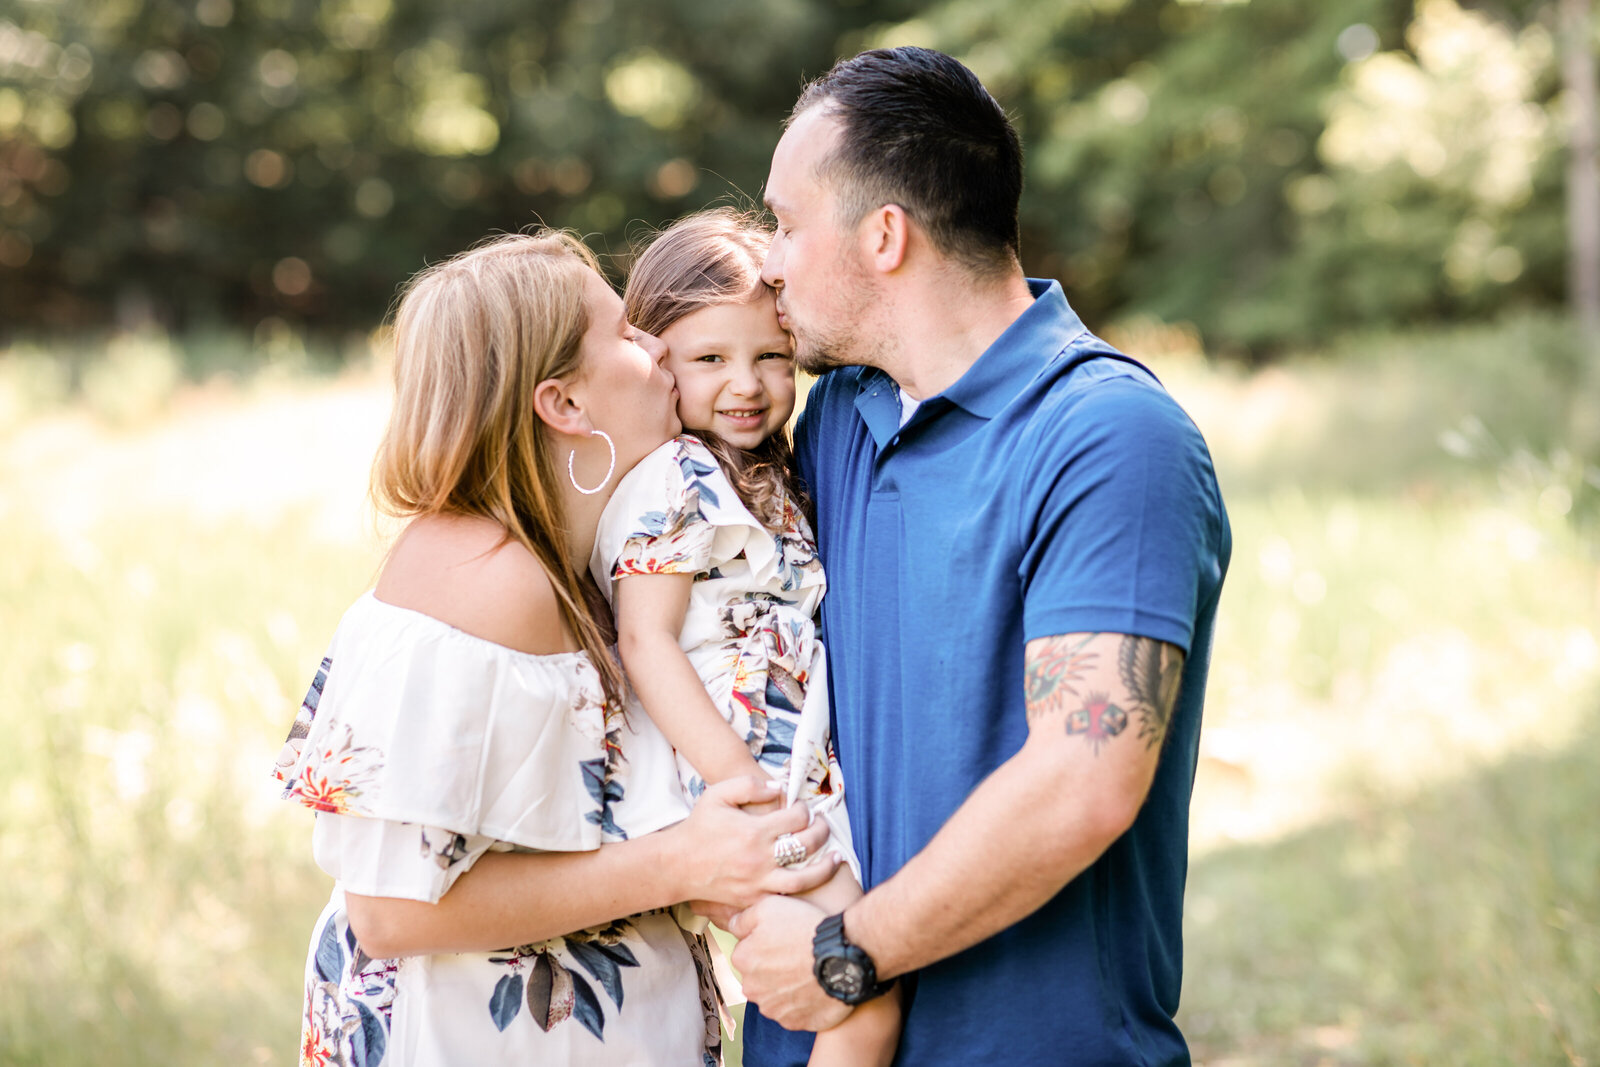 mom and dad kissing daughter for family photos in park